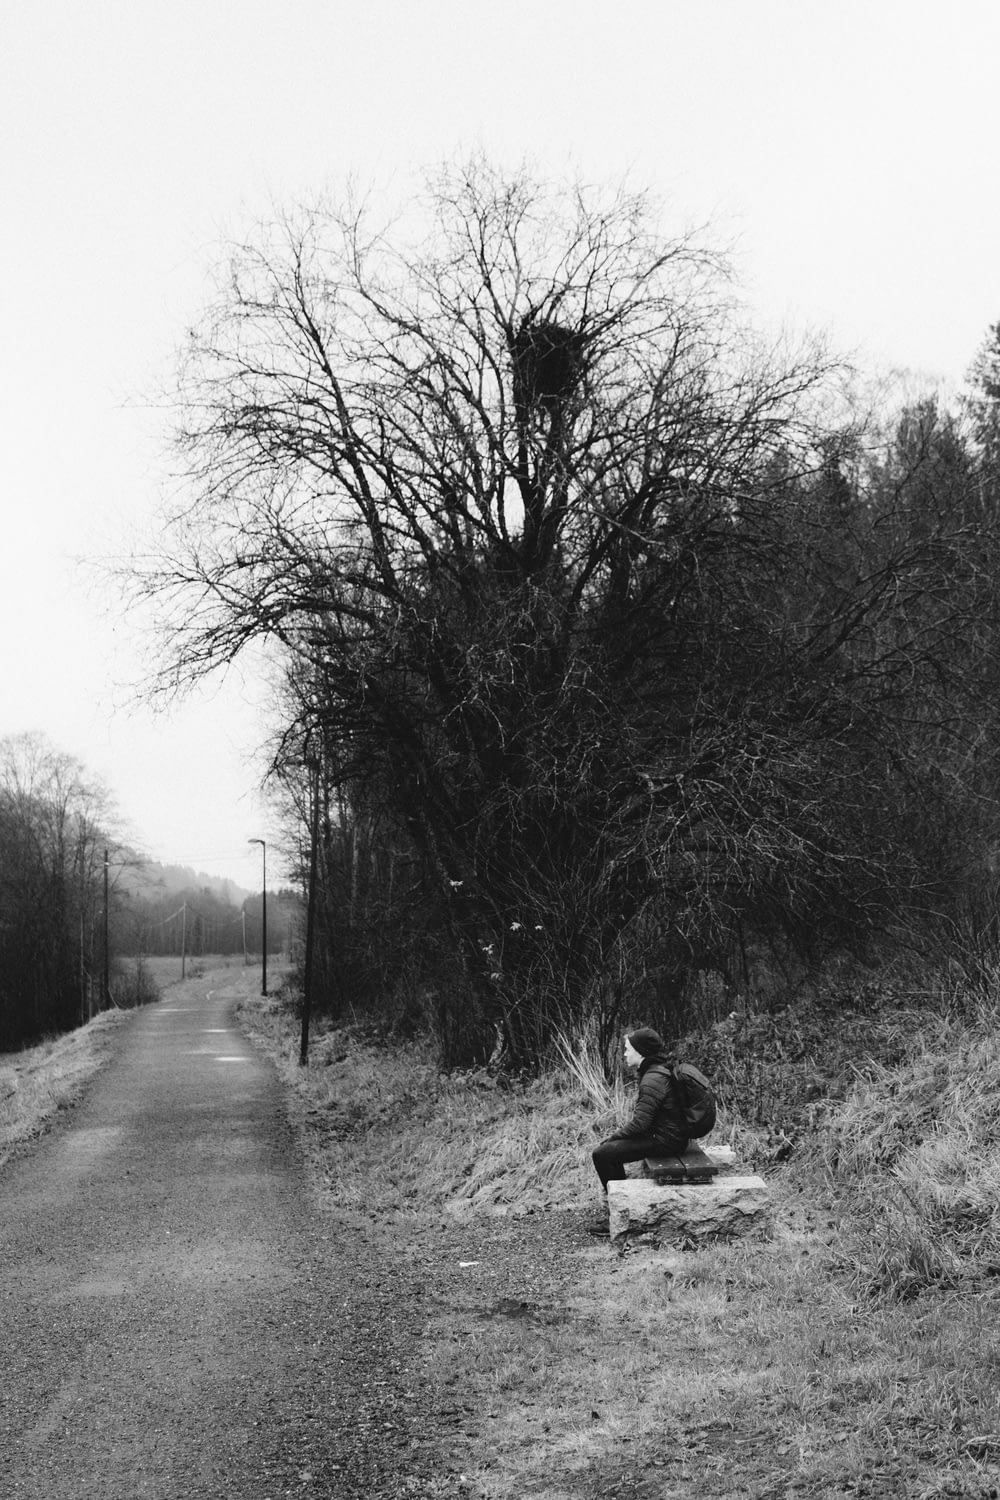 grayscale photo of a woman sitting on a road in the middle of a forest